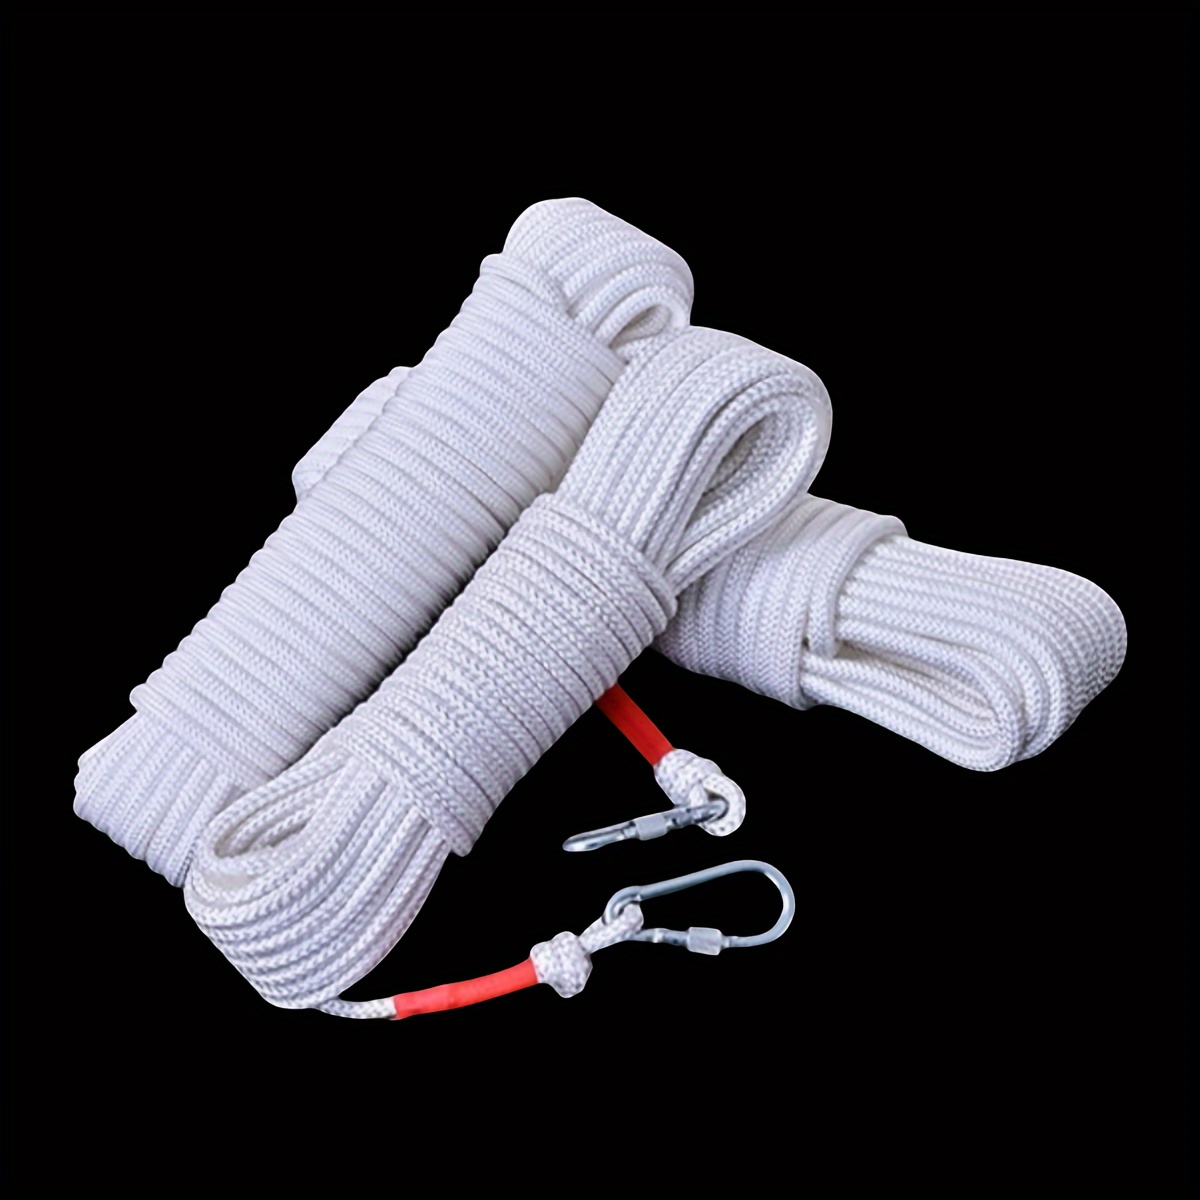  Clothesline Clothes Drying Rope Portable Travel